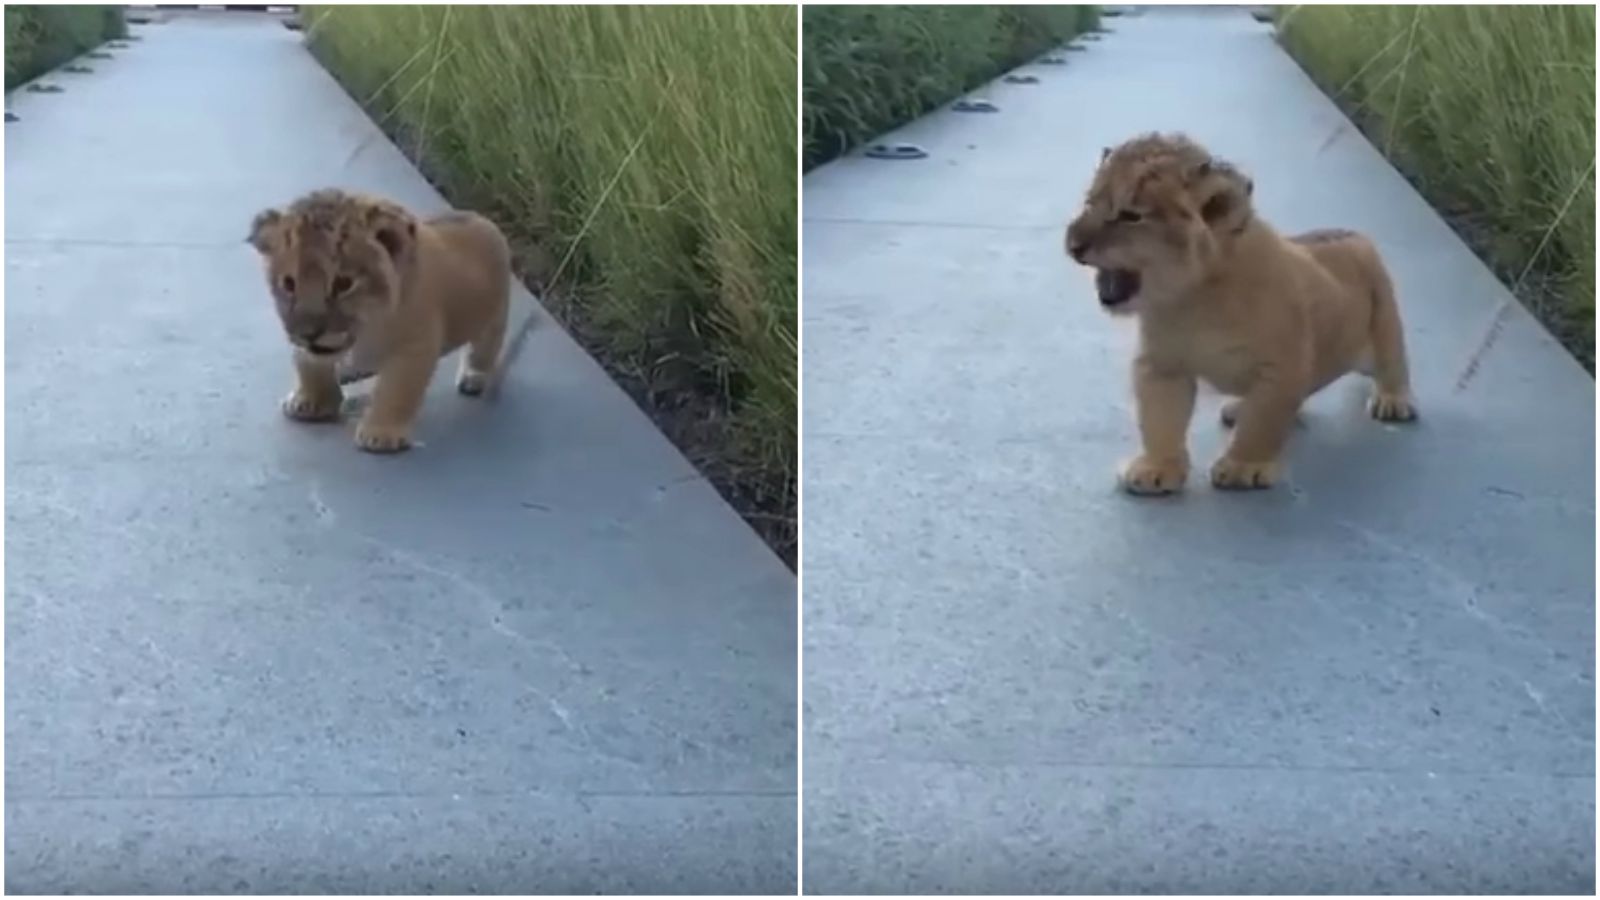 Watching This Adorable Lion Cub Trying to Roar Will Be the Best Part of Your Day!